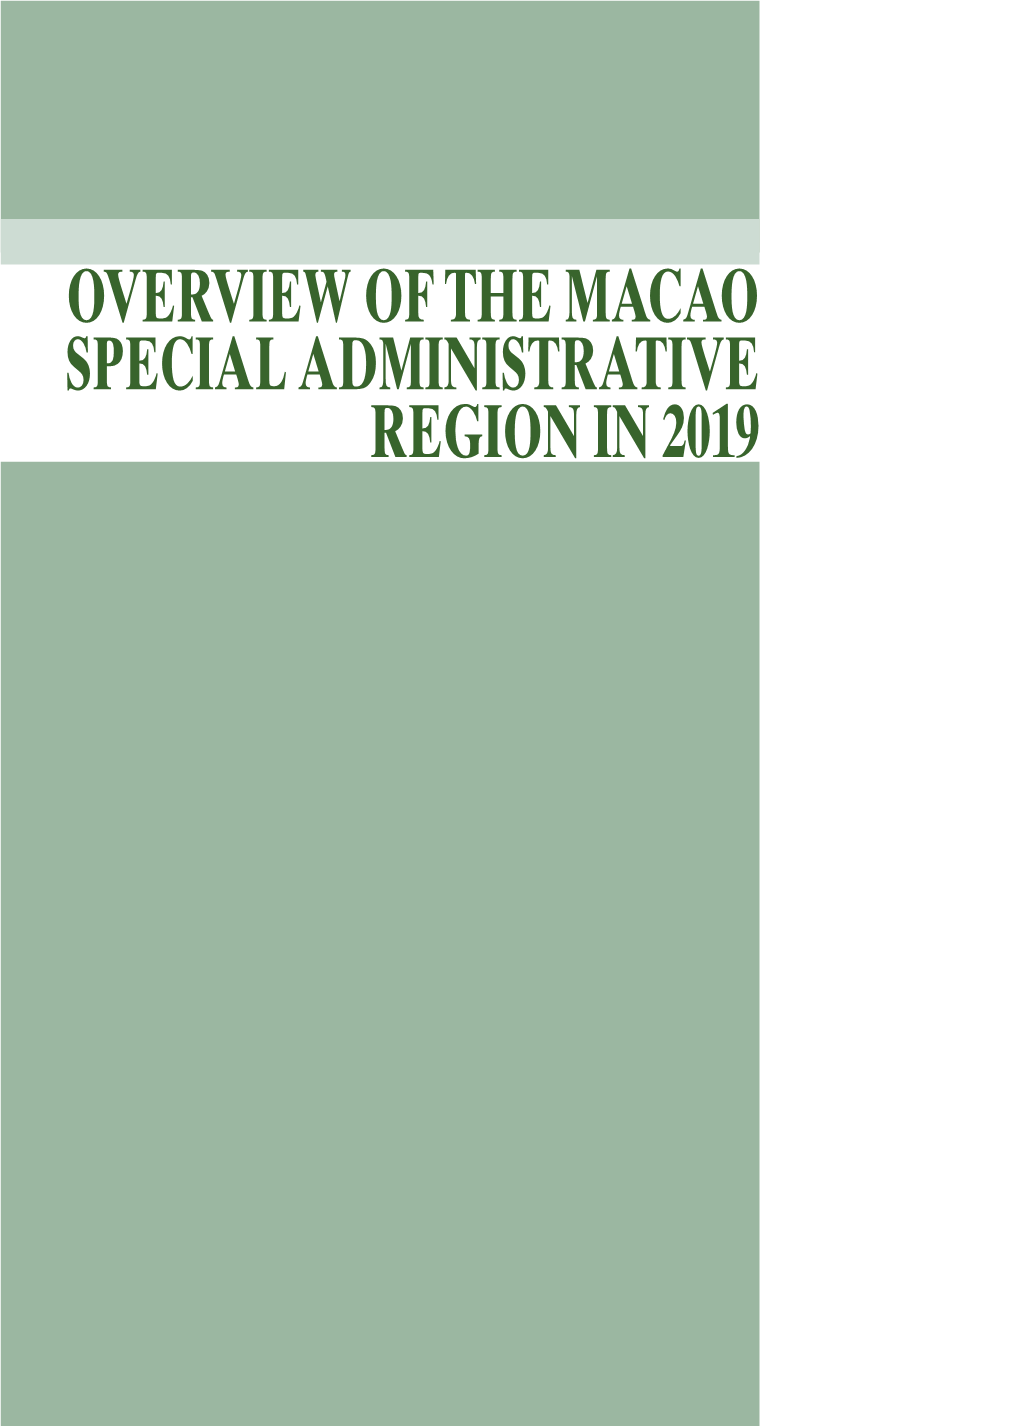 Overview of the Macao Special Administrative Region in 2019 4